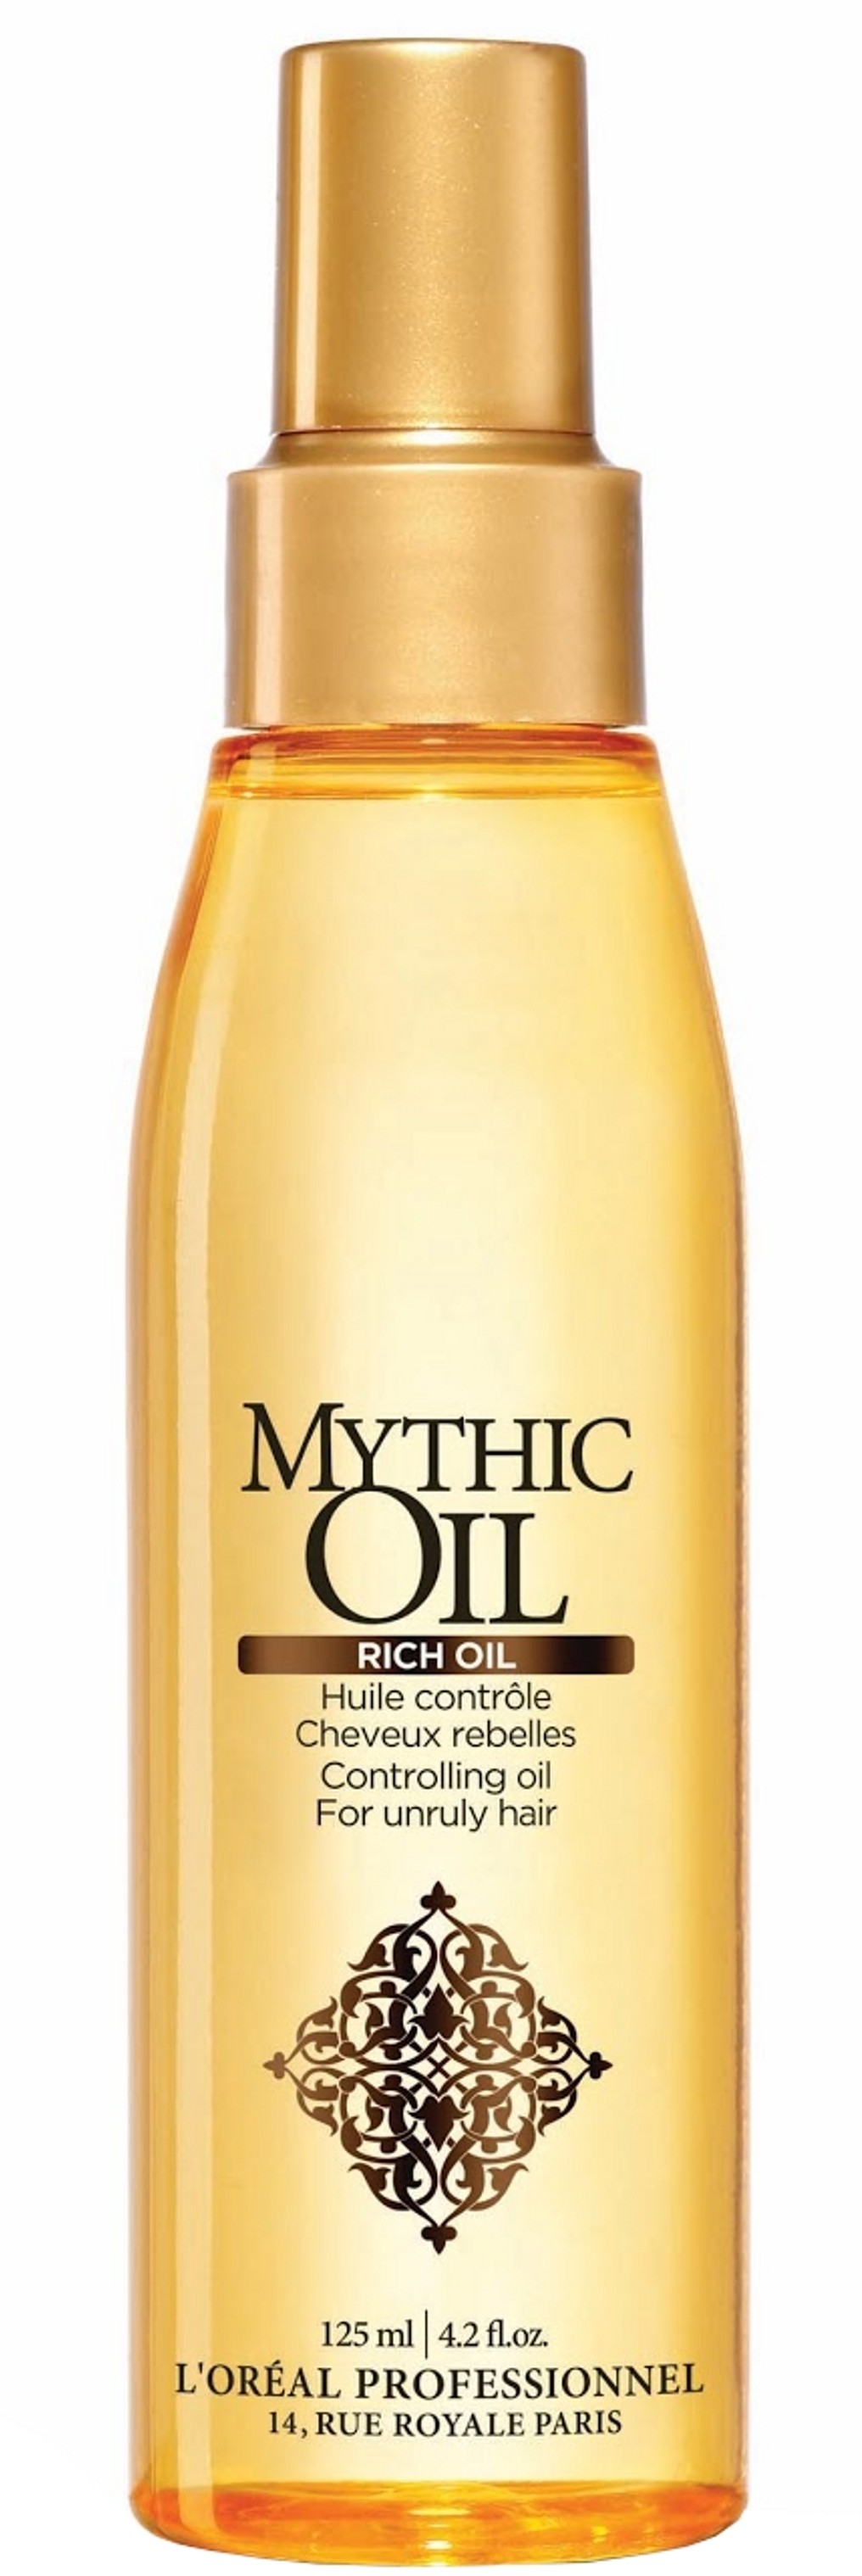 Concept масло для волос. Масло Митик Ойл лореаль. Масло l'Oreal Mythic Oil. Митик оил масло для волос лореаль. L’Oreal Professionnel Mythic Oil Rich Oil;.